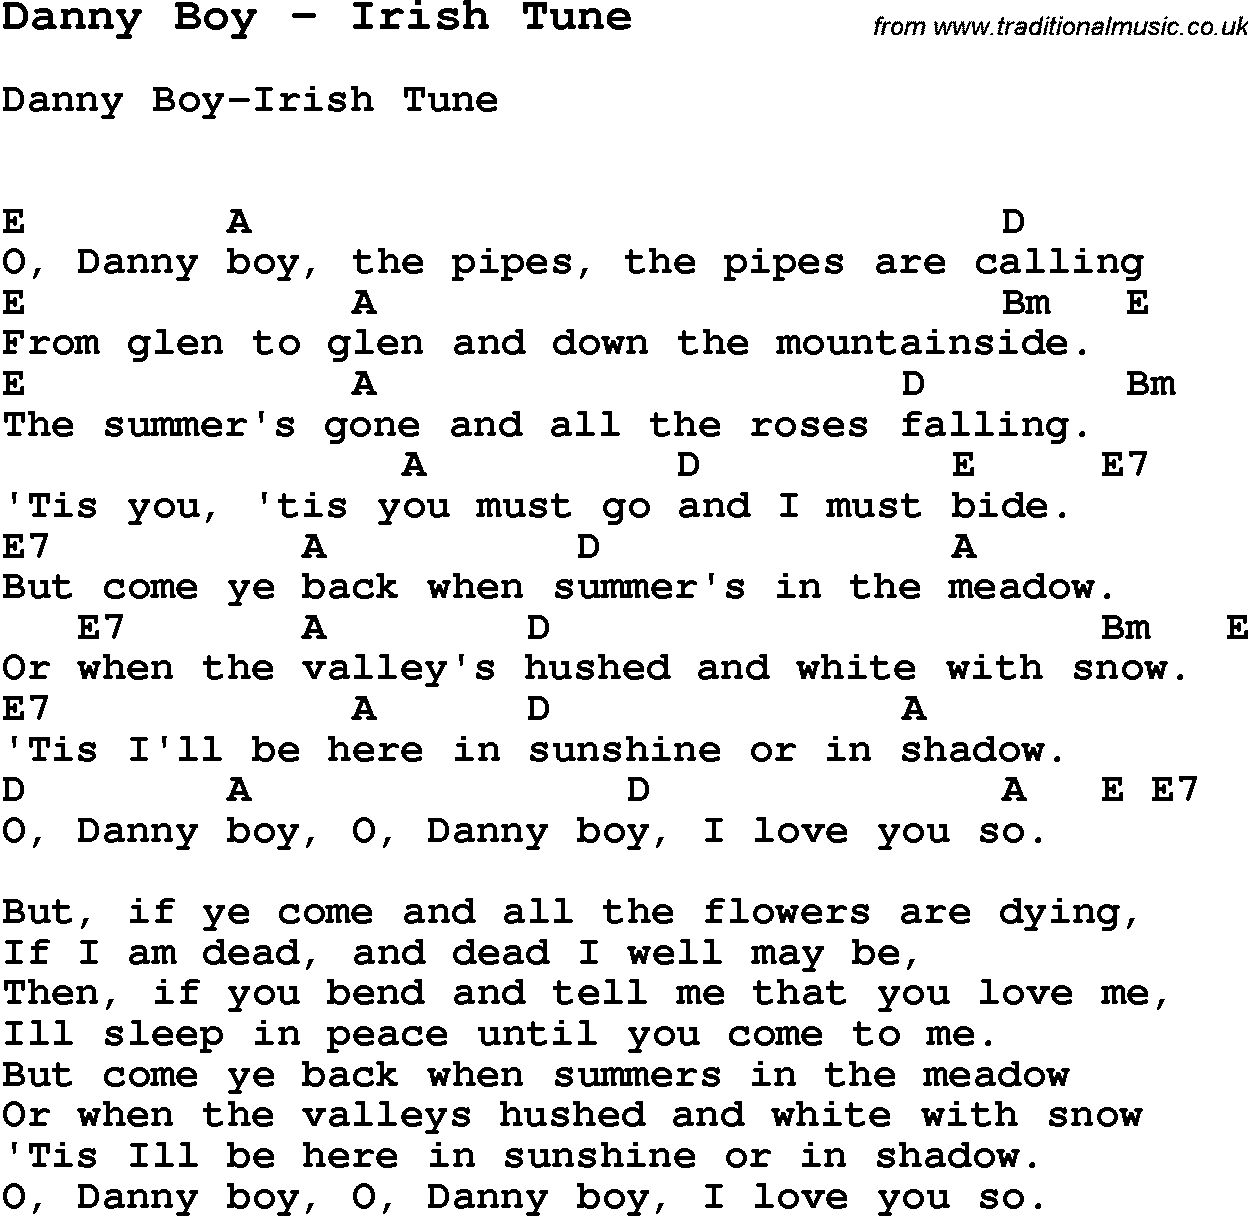 Song Danny Boy by Irish Tune, with lyrics for vocal performance and accompaniment chords for Ukulele, Guitar Banjo etc.